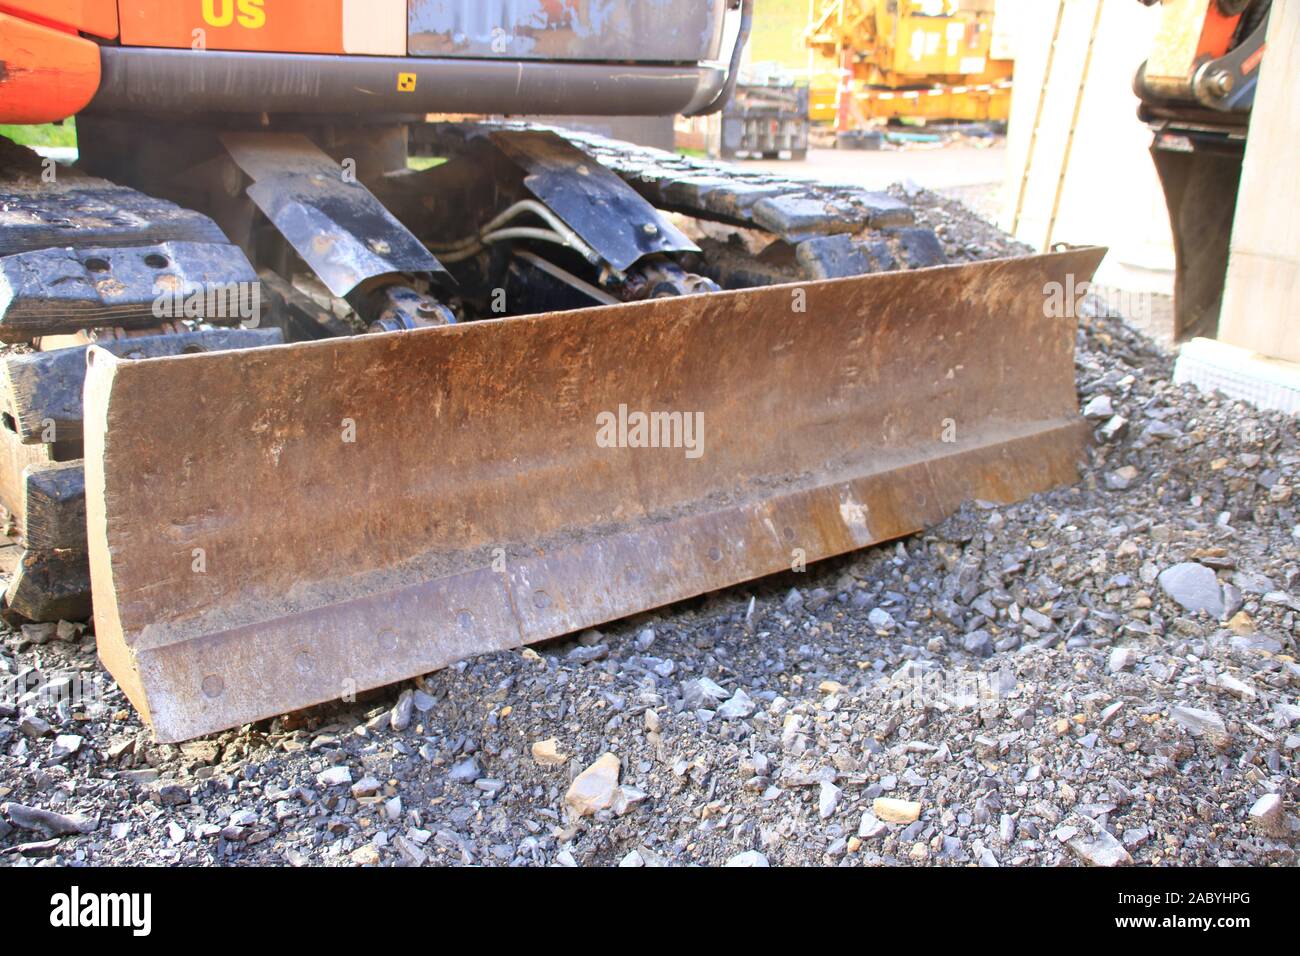 Plowing blade on an excavator was parked on gravel Stock Photo